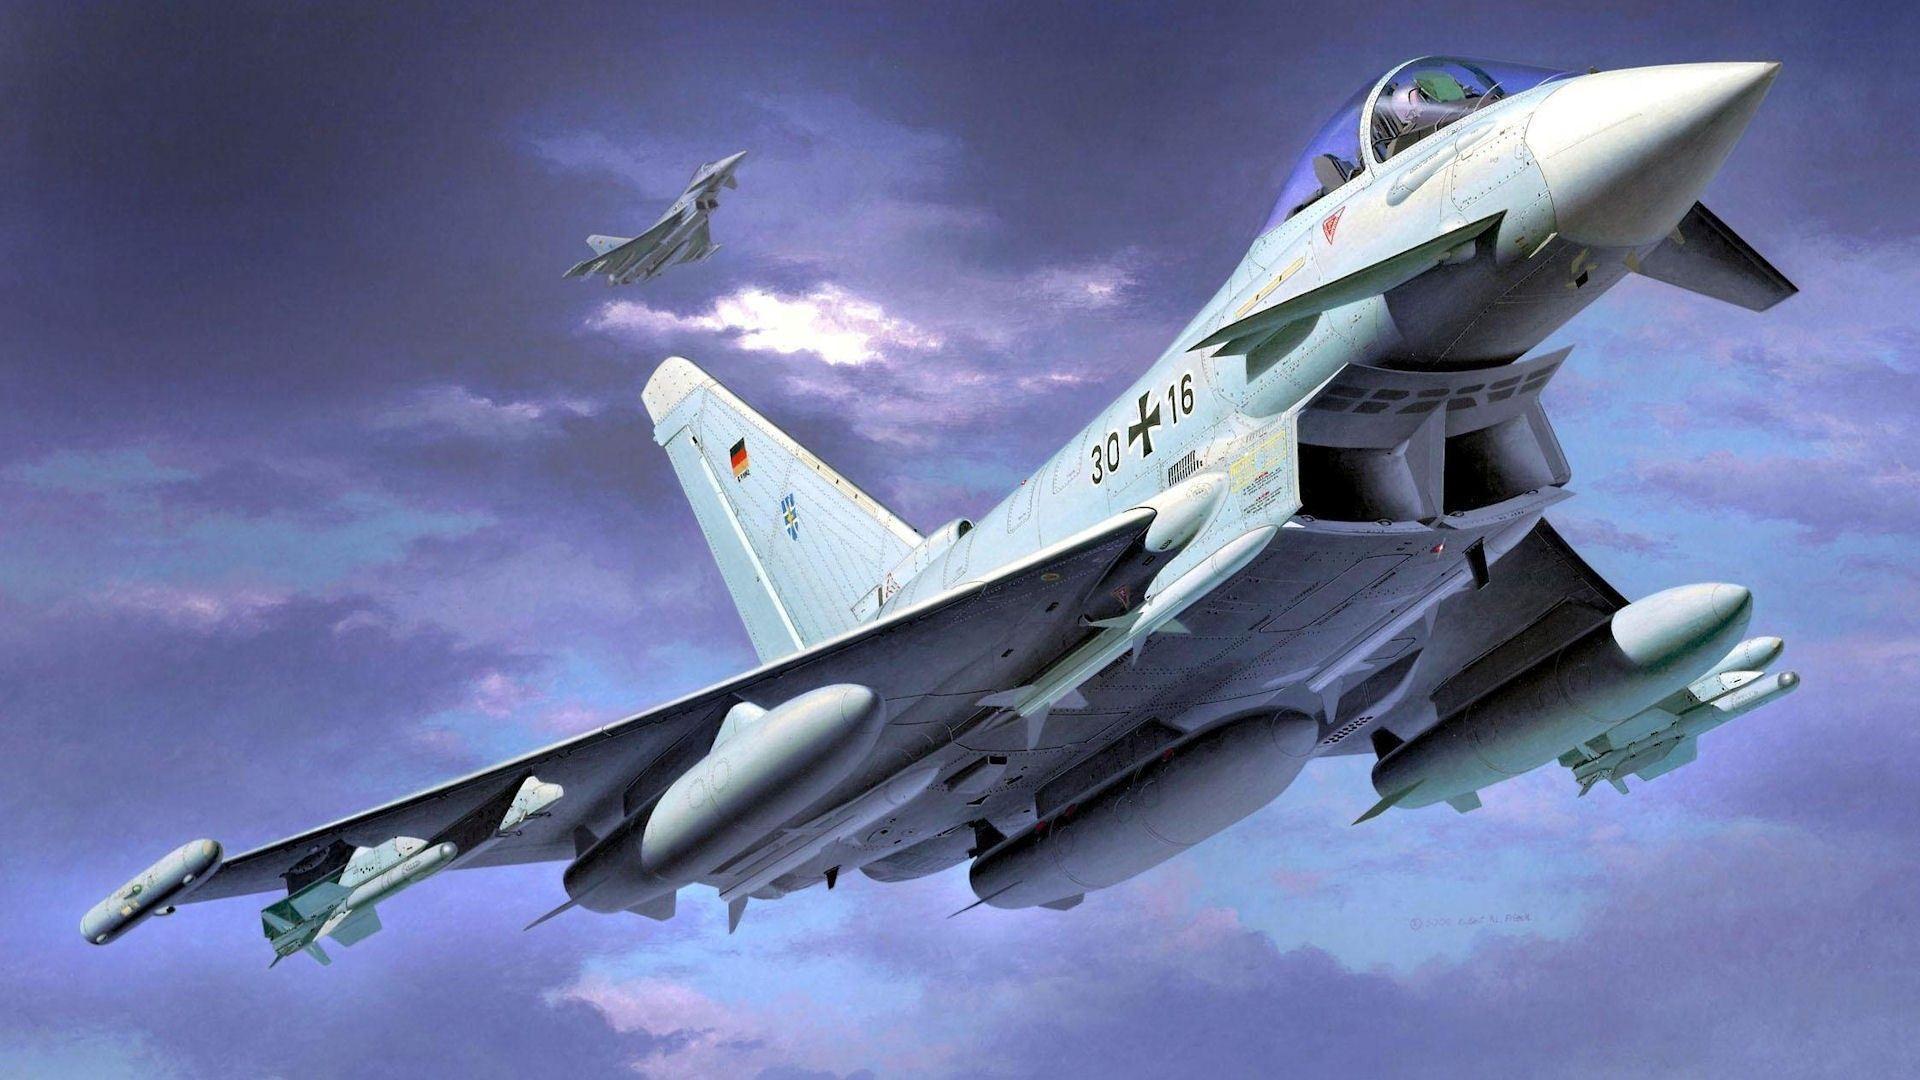 Fighter Plane HD Wallpaper Image Picture Photo Download